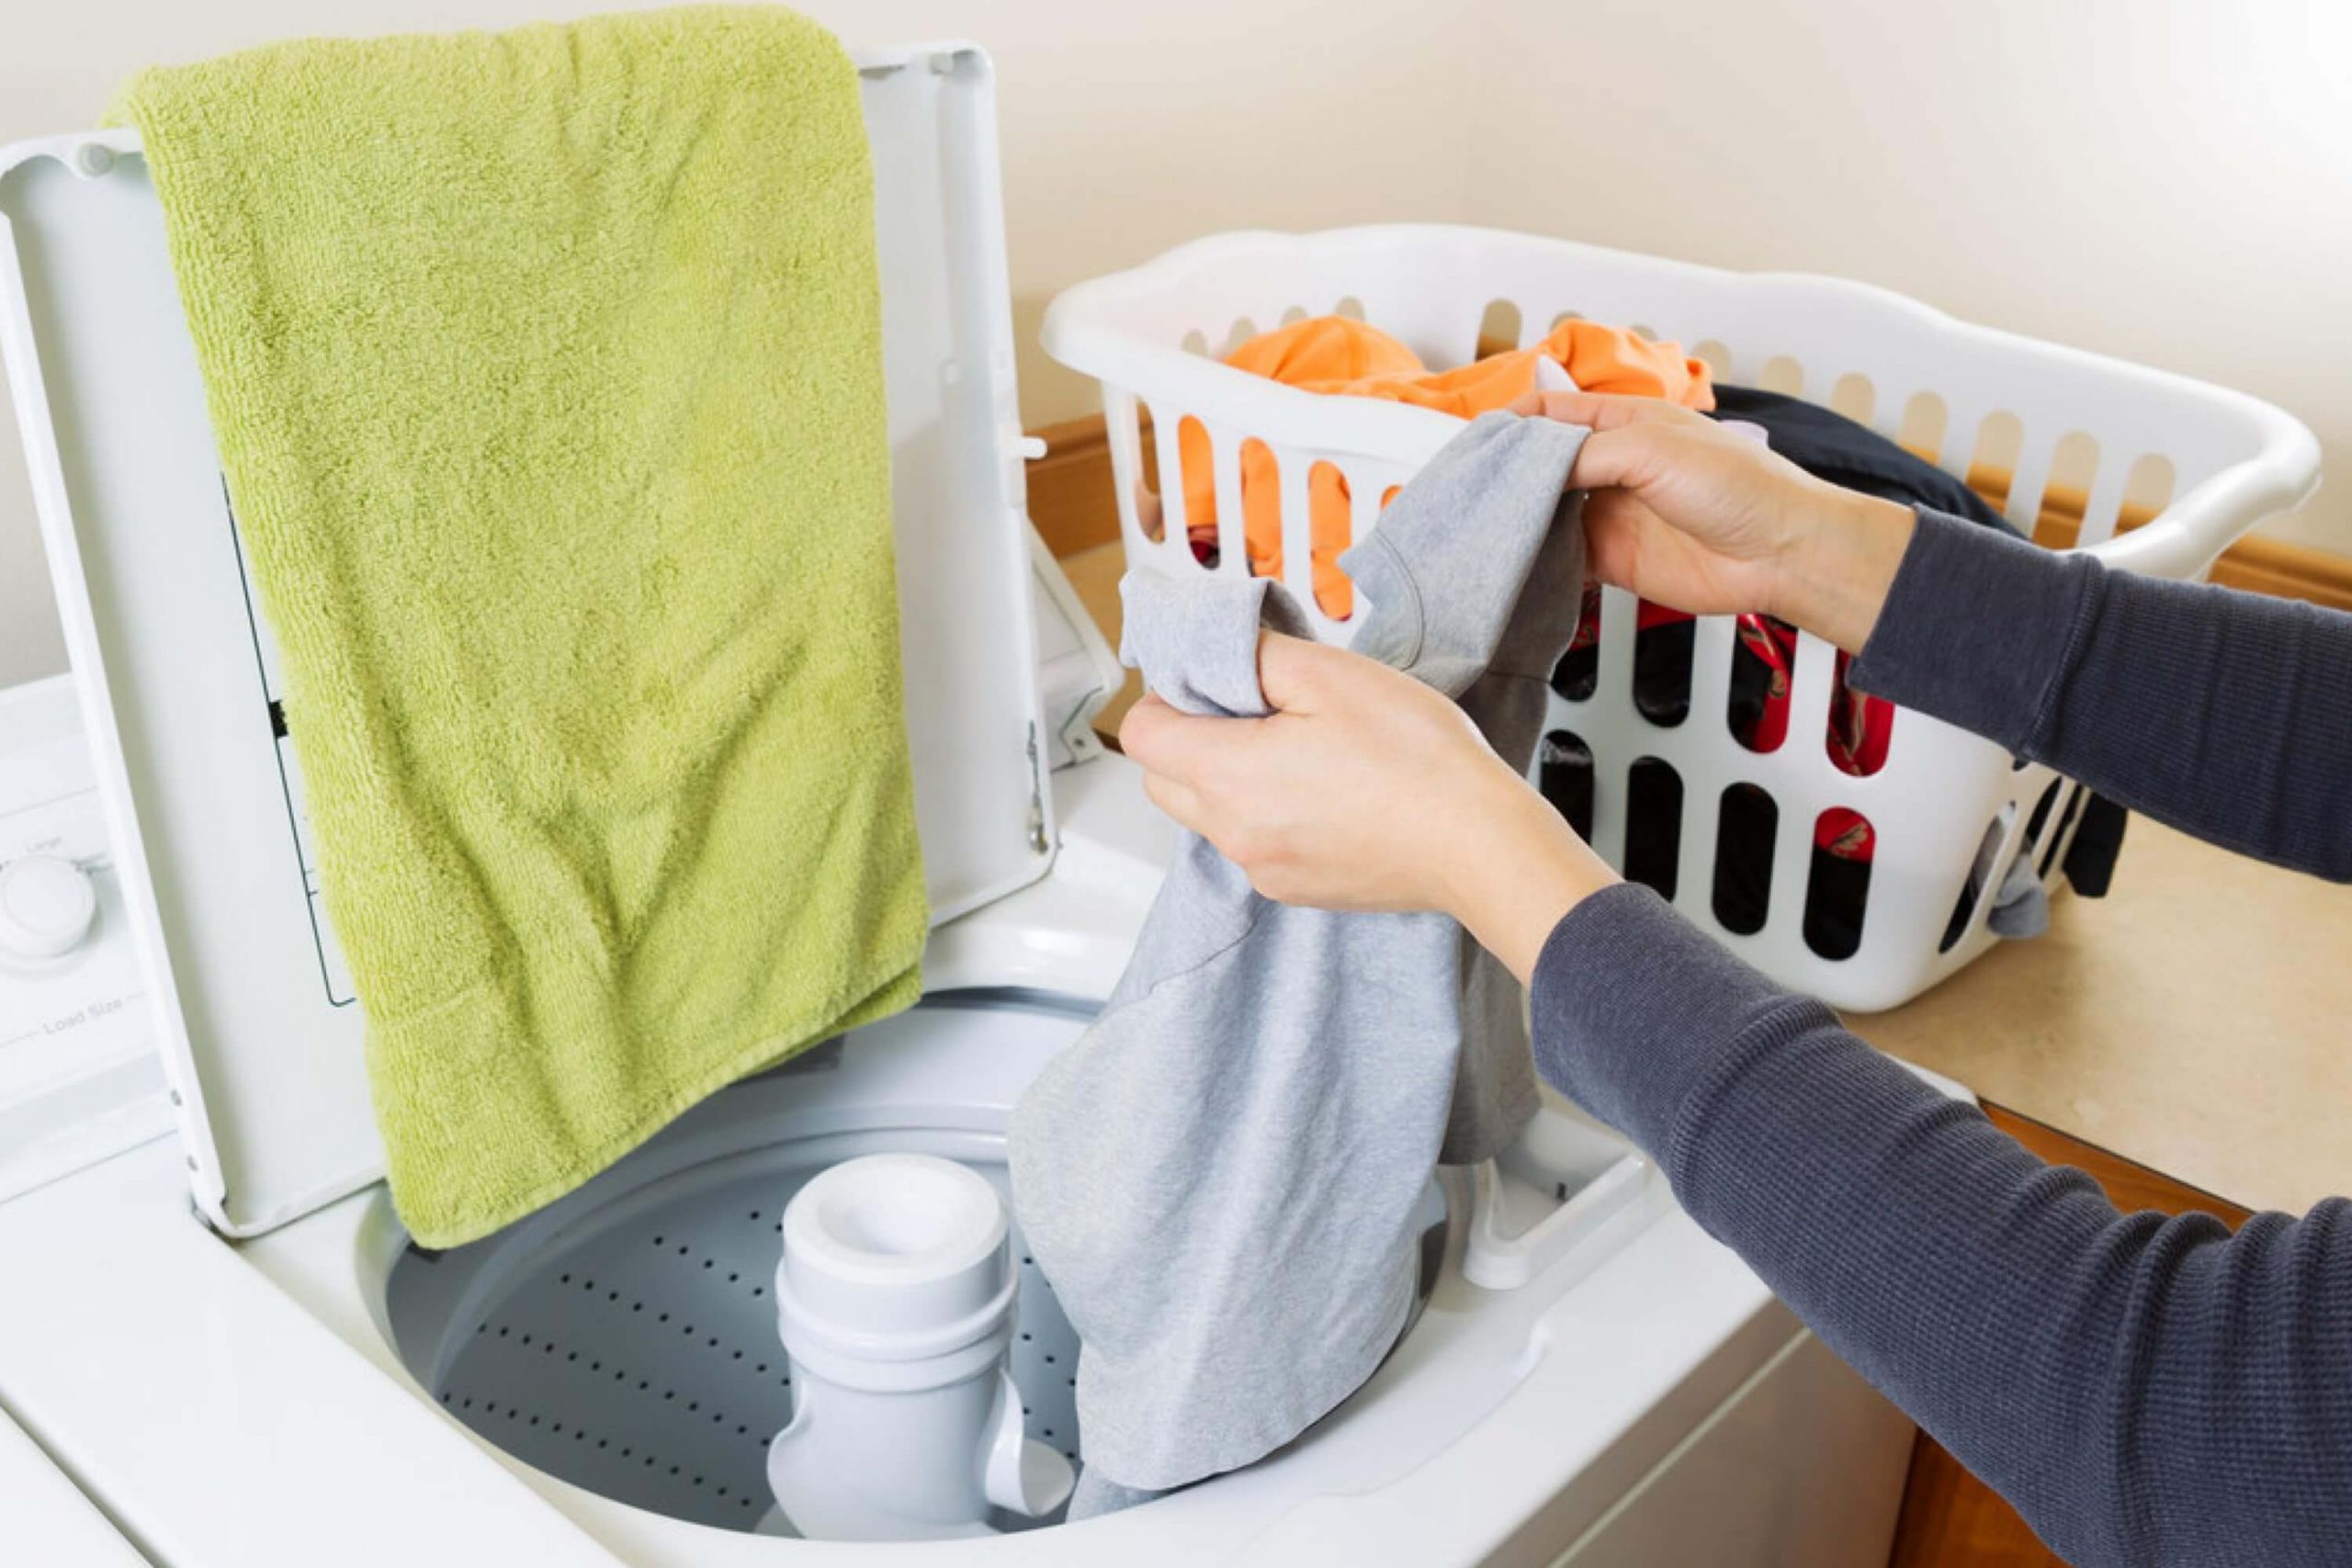 How to Avoid And Prevent Bad Smell In Your Laundry From Developing